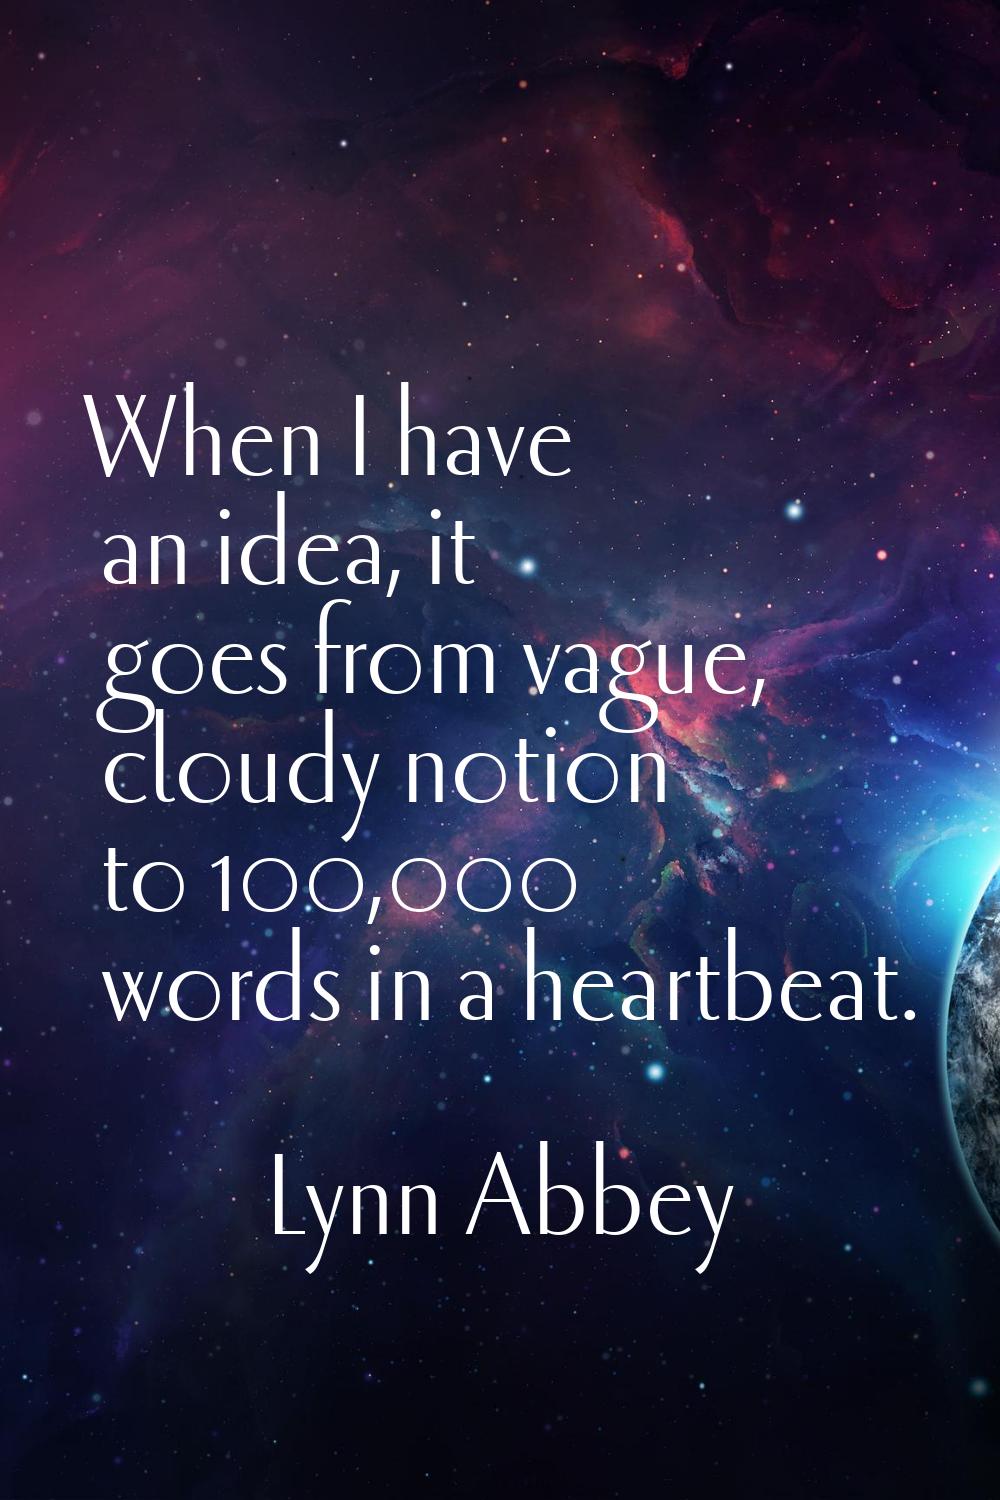 When I have an idea, it goes from vague, cloudy notion to 100,000 words in a heartbeat.